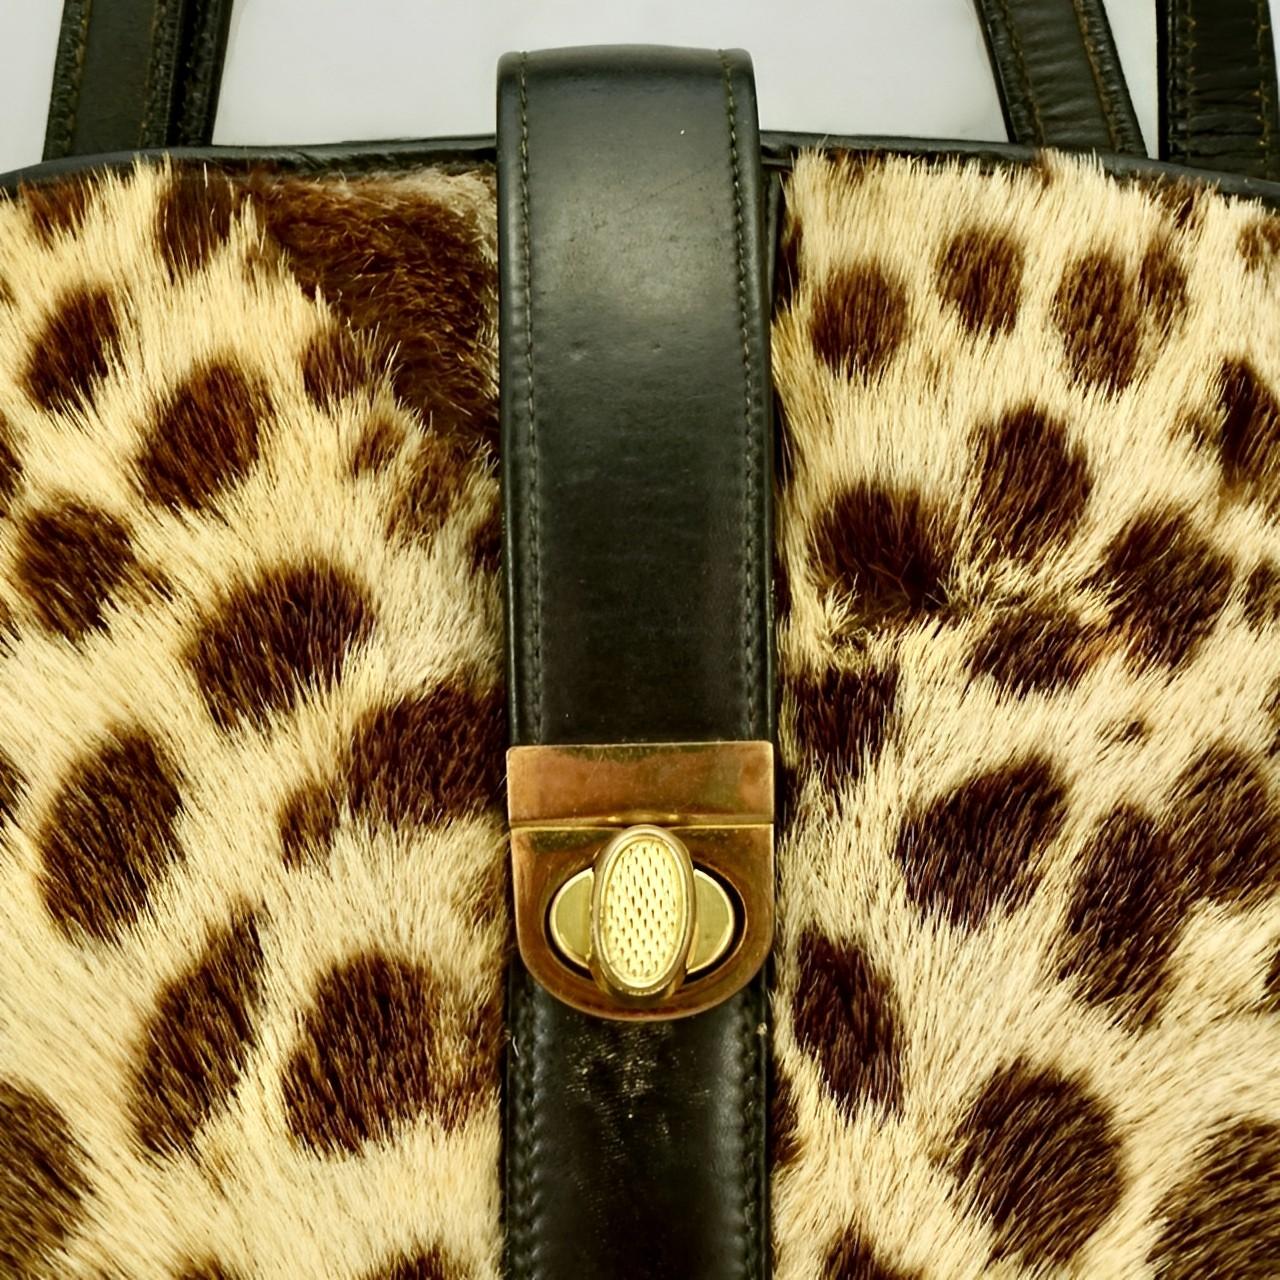 Fabulous black leather and spotted fur hand bag (possibly pony), with gold plated fittings.

Measuring width 26.5 cm / 10.4 inches at the base, height 23.4 cm / 9.2 inches, depth approximately 5.5 cm / 2.1 inches, and with a strap drop of 12.5 cm /